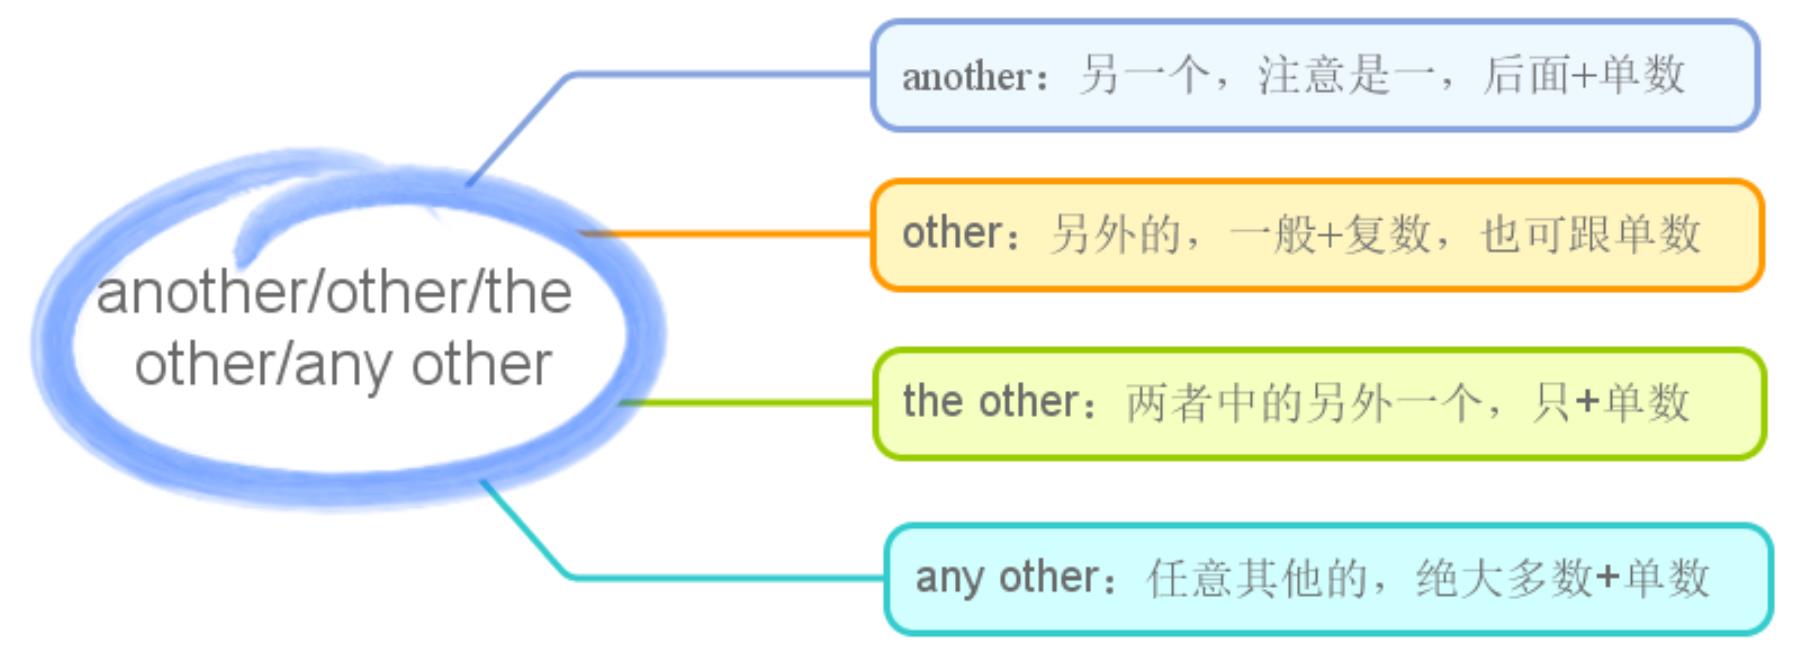 another,other,the other,any other四个的区别